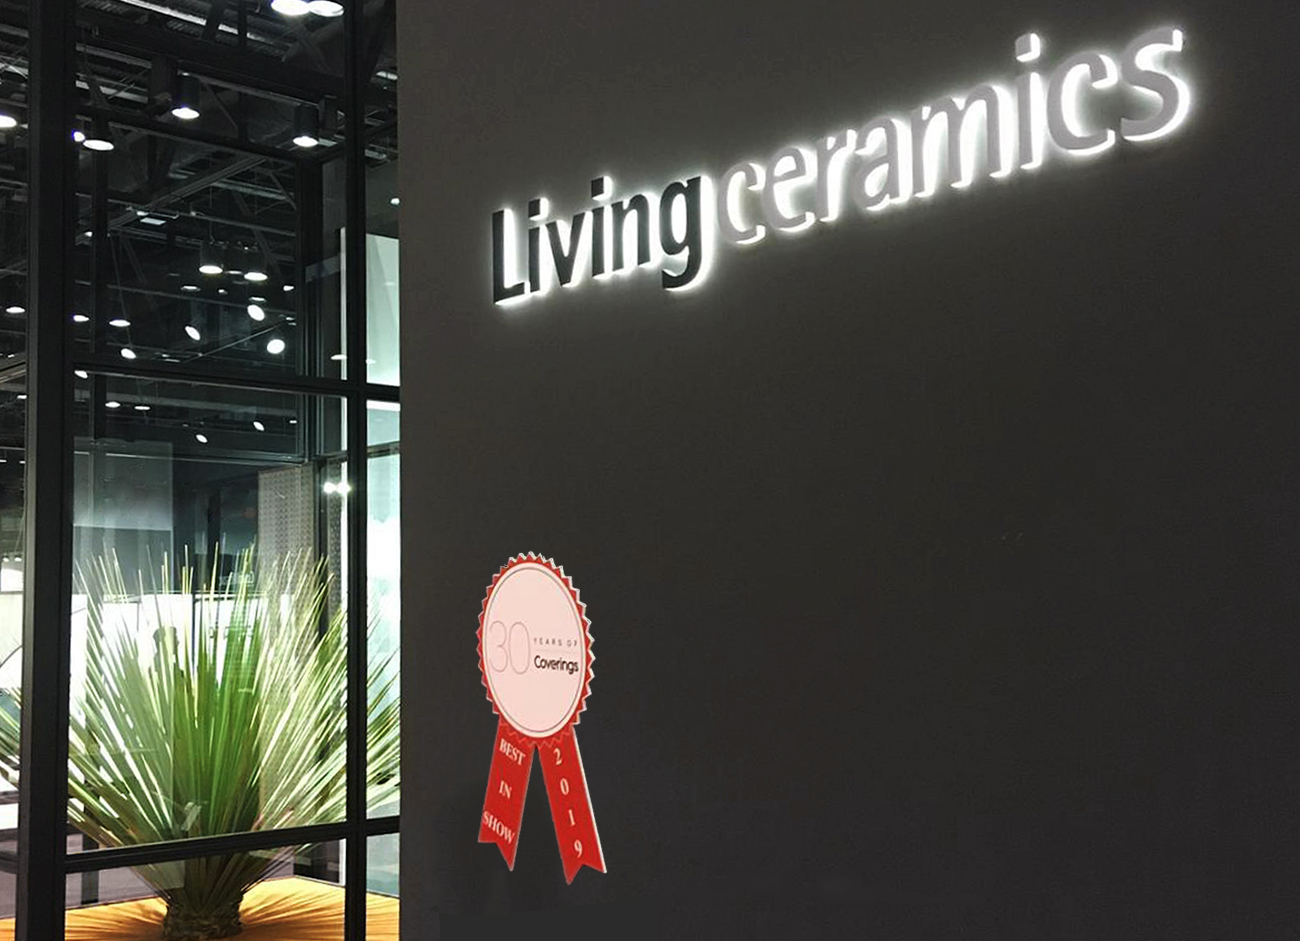 Coverings premia a Living con el “Best in show”